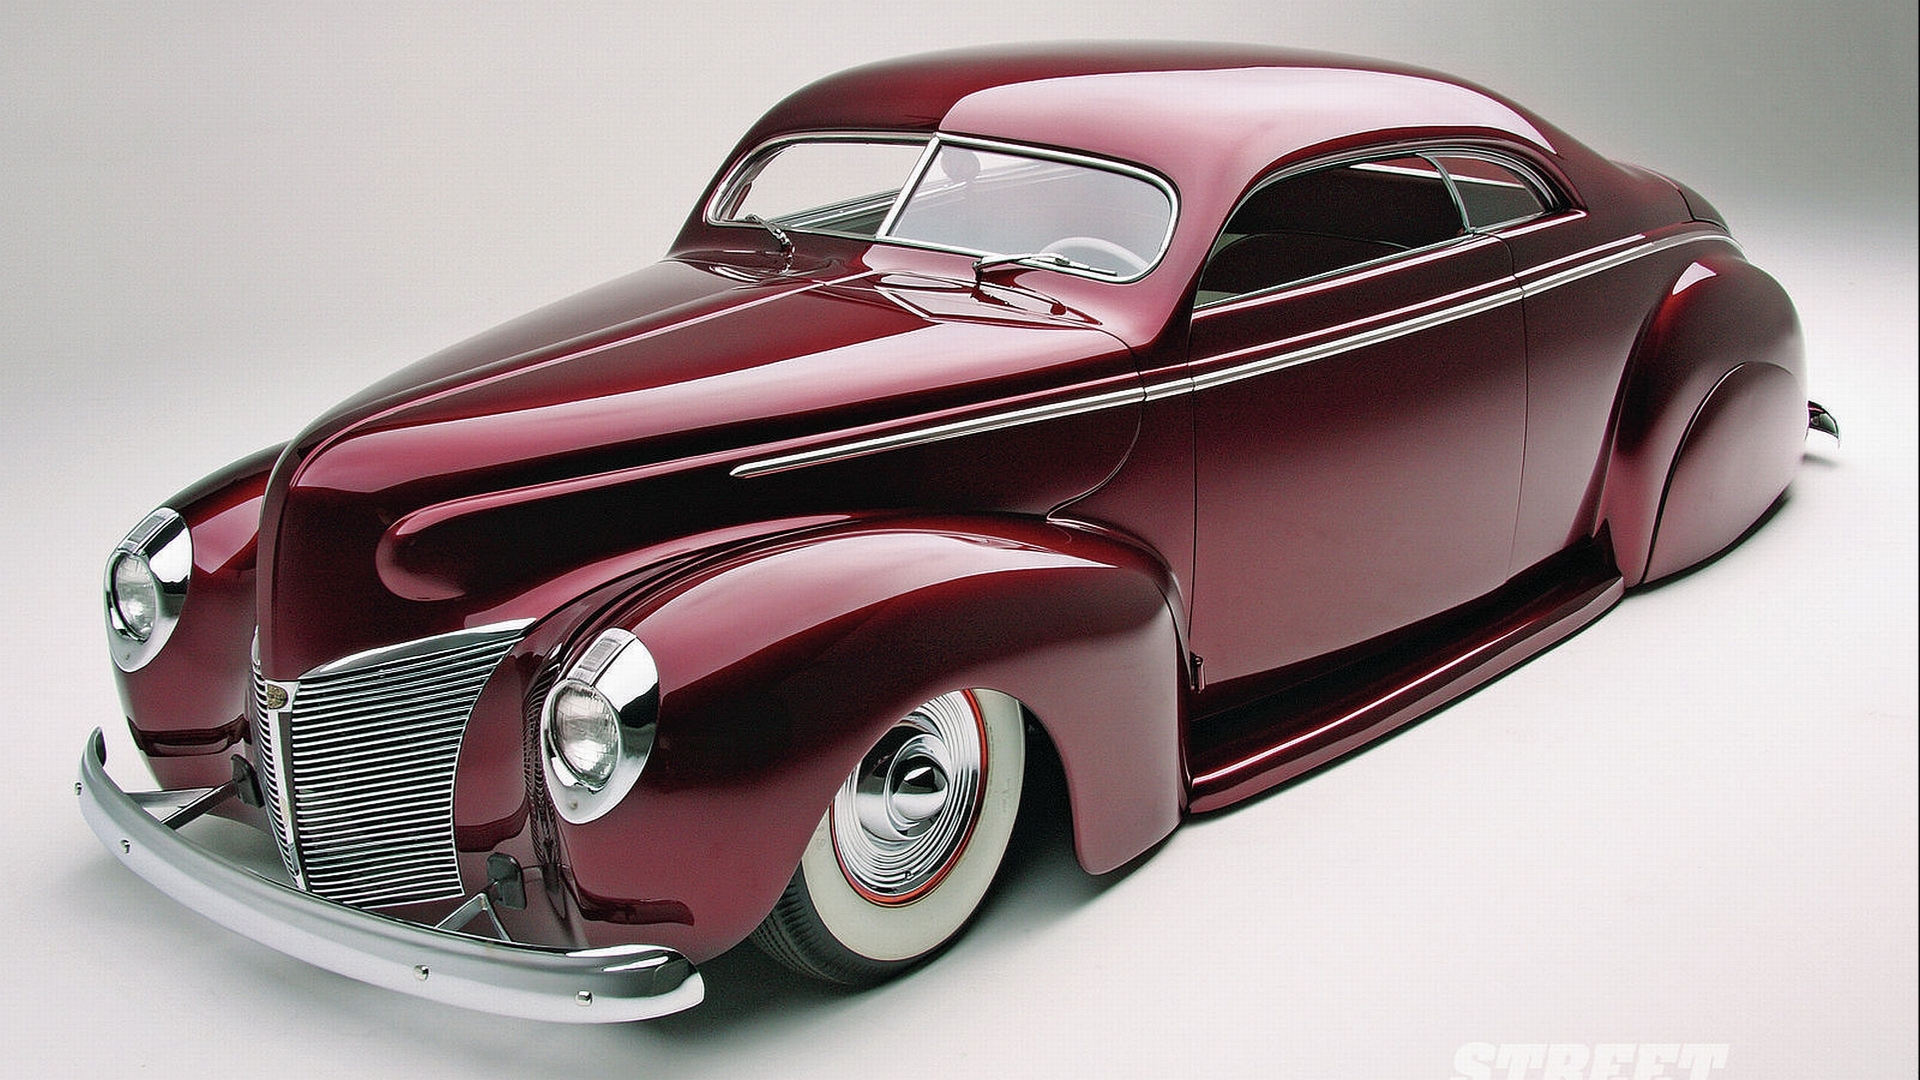  50 Classic Car  Wallpaper and Screensavers  on 